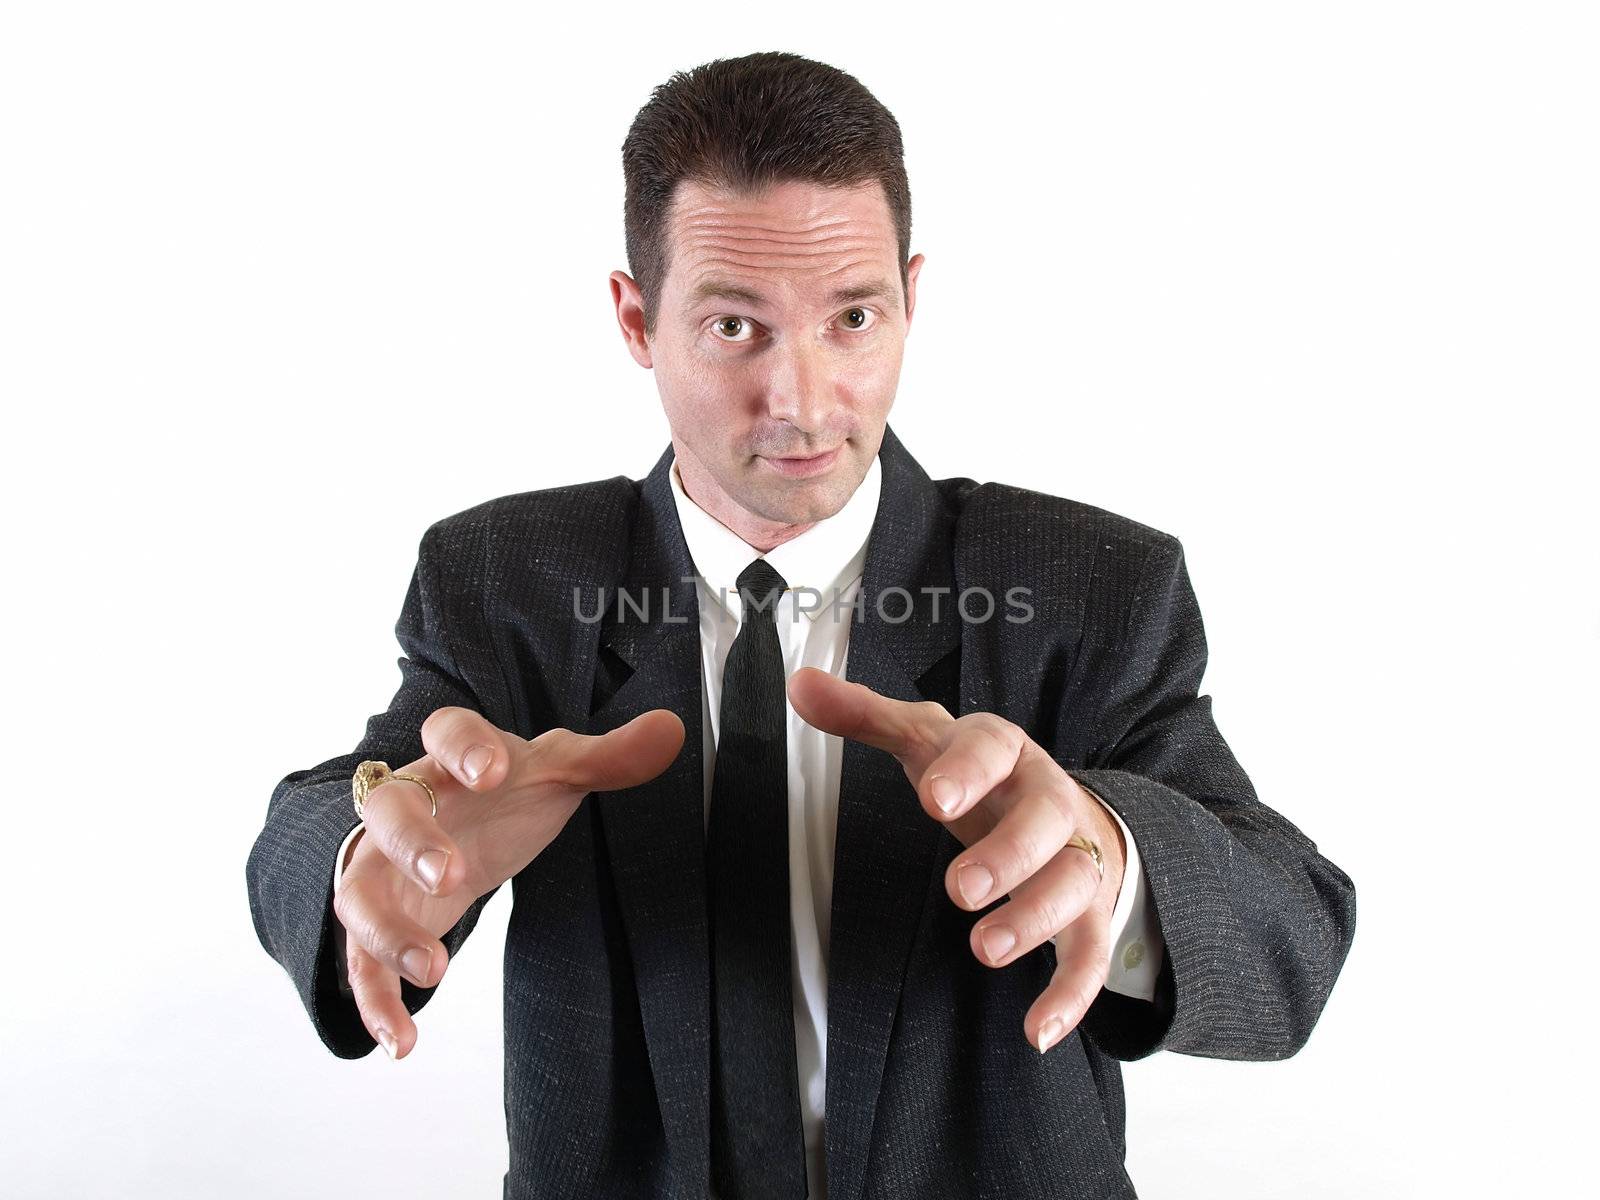 A male in a business suit reaches his hands out ready to grasp something.